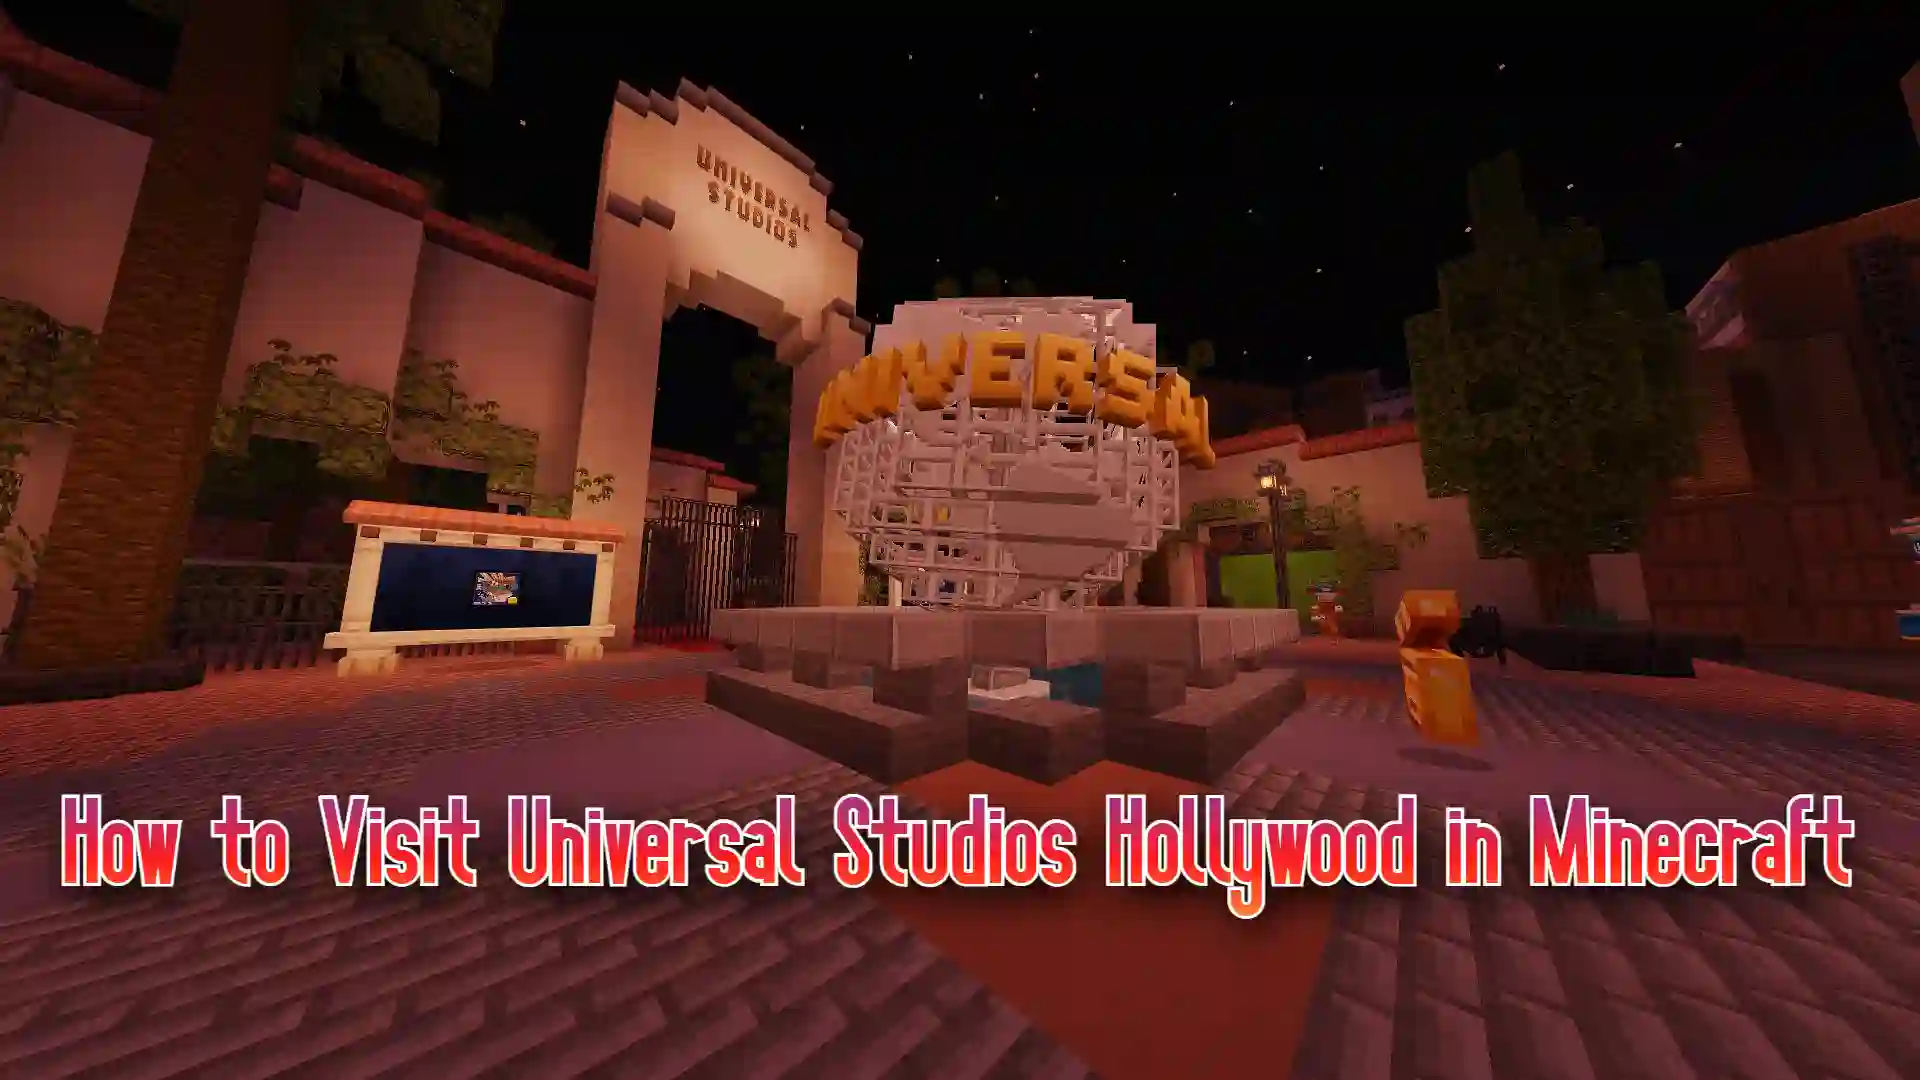 How to Visit Universal Studios Hollywood in Minecraft